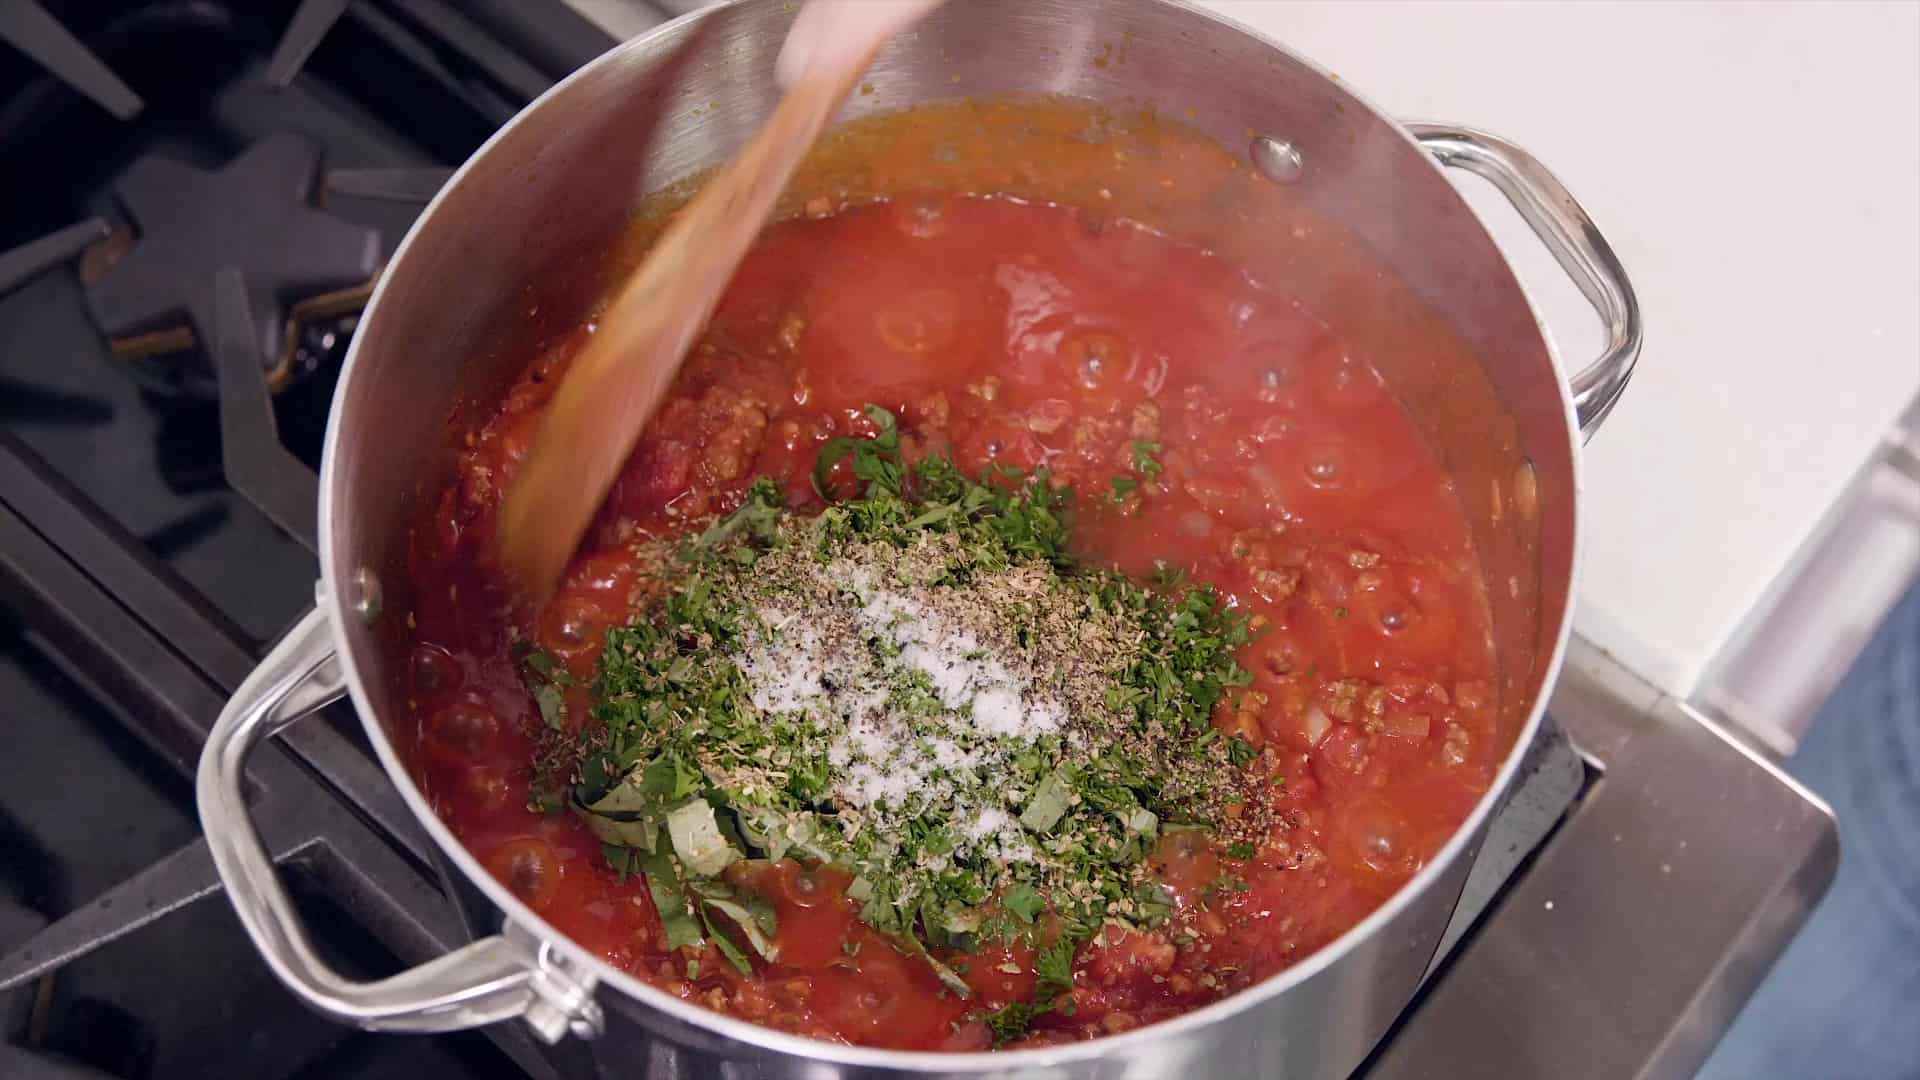 Overhead view of metal saucepan filled with red sauce and fresh chopped oregano, chopped basil and other dried spices and a wooden spoon stirring to combine all stirring on a stovetop burner.